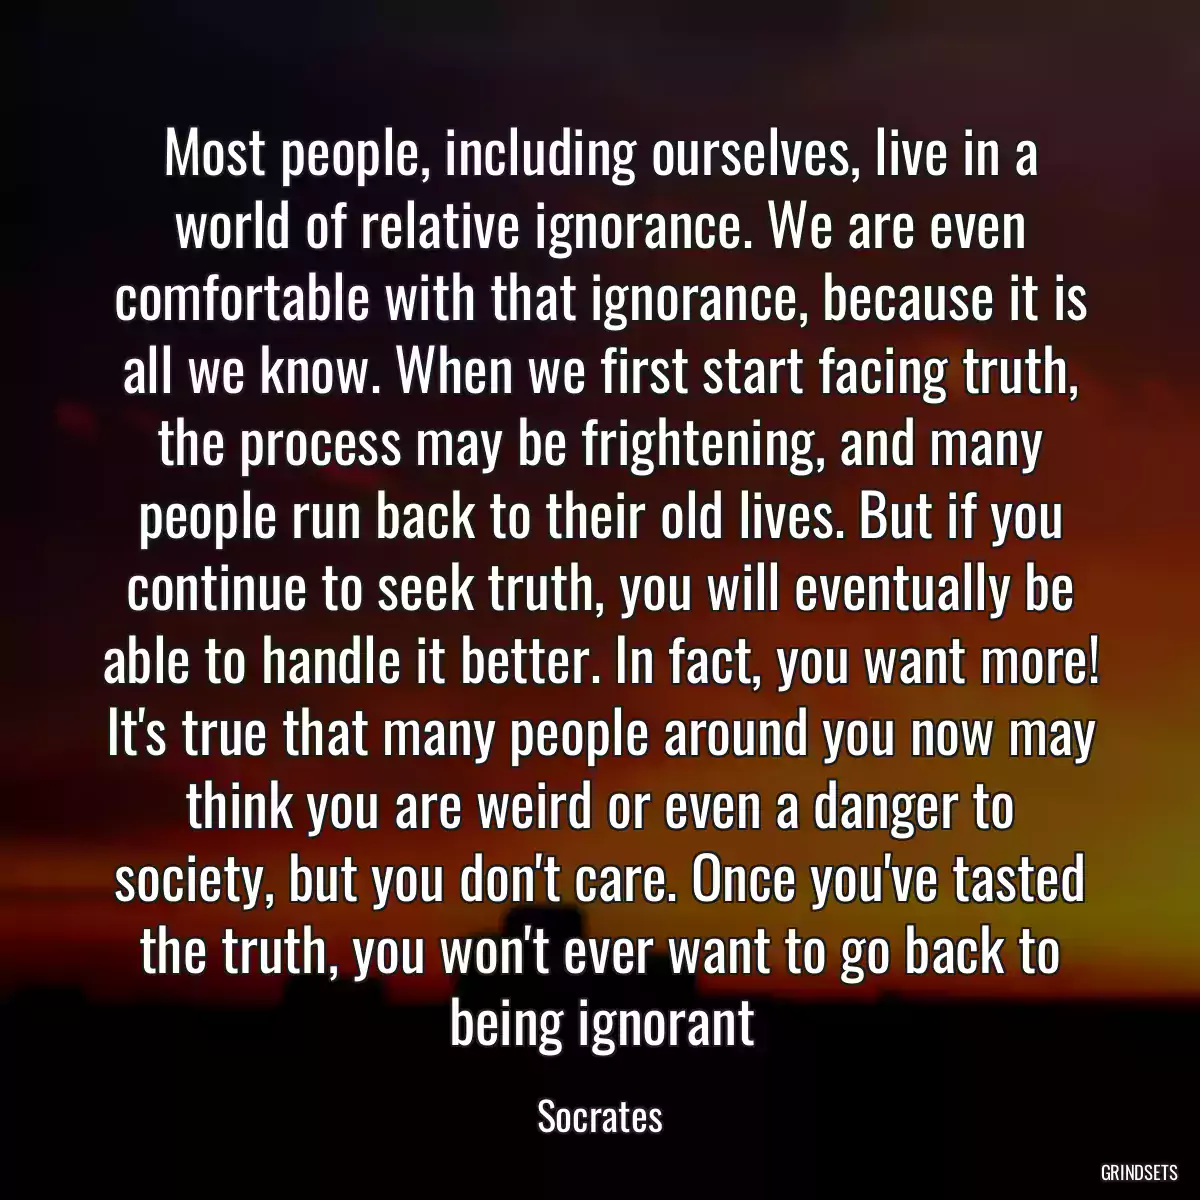 Most people, including ourselves, live in a world of relative ignorance. We are even comfortable with that ignorance, because it is all we know. When we first start facing truth, the process may be frightening, and many people run back to their old lives. But if you continue to seek truth, you will eventually be able to handle it better. In fact, you want more! It\'s true that many people around you now may think you are weird or even a danger to society, but you don\'t care. Once you\'ve tasted the truth, you won\'t ever want to go back to being ignorant